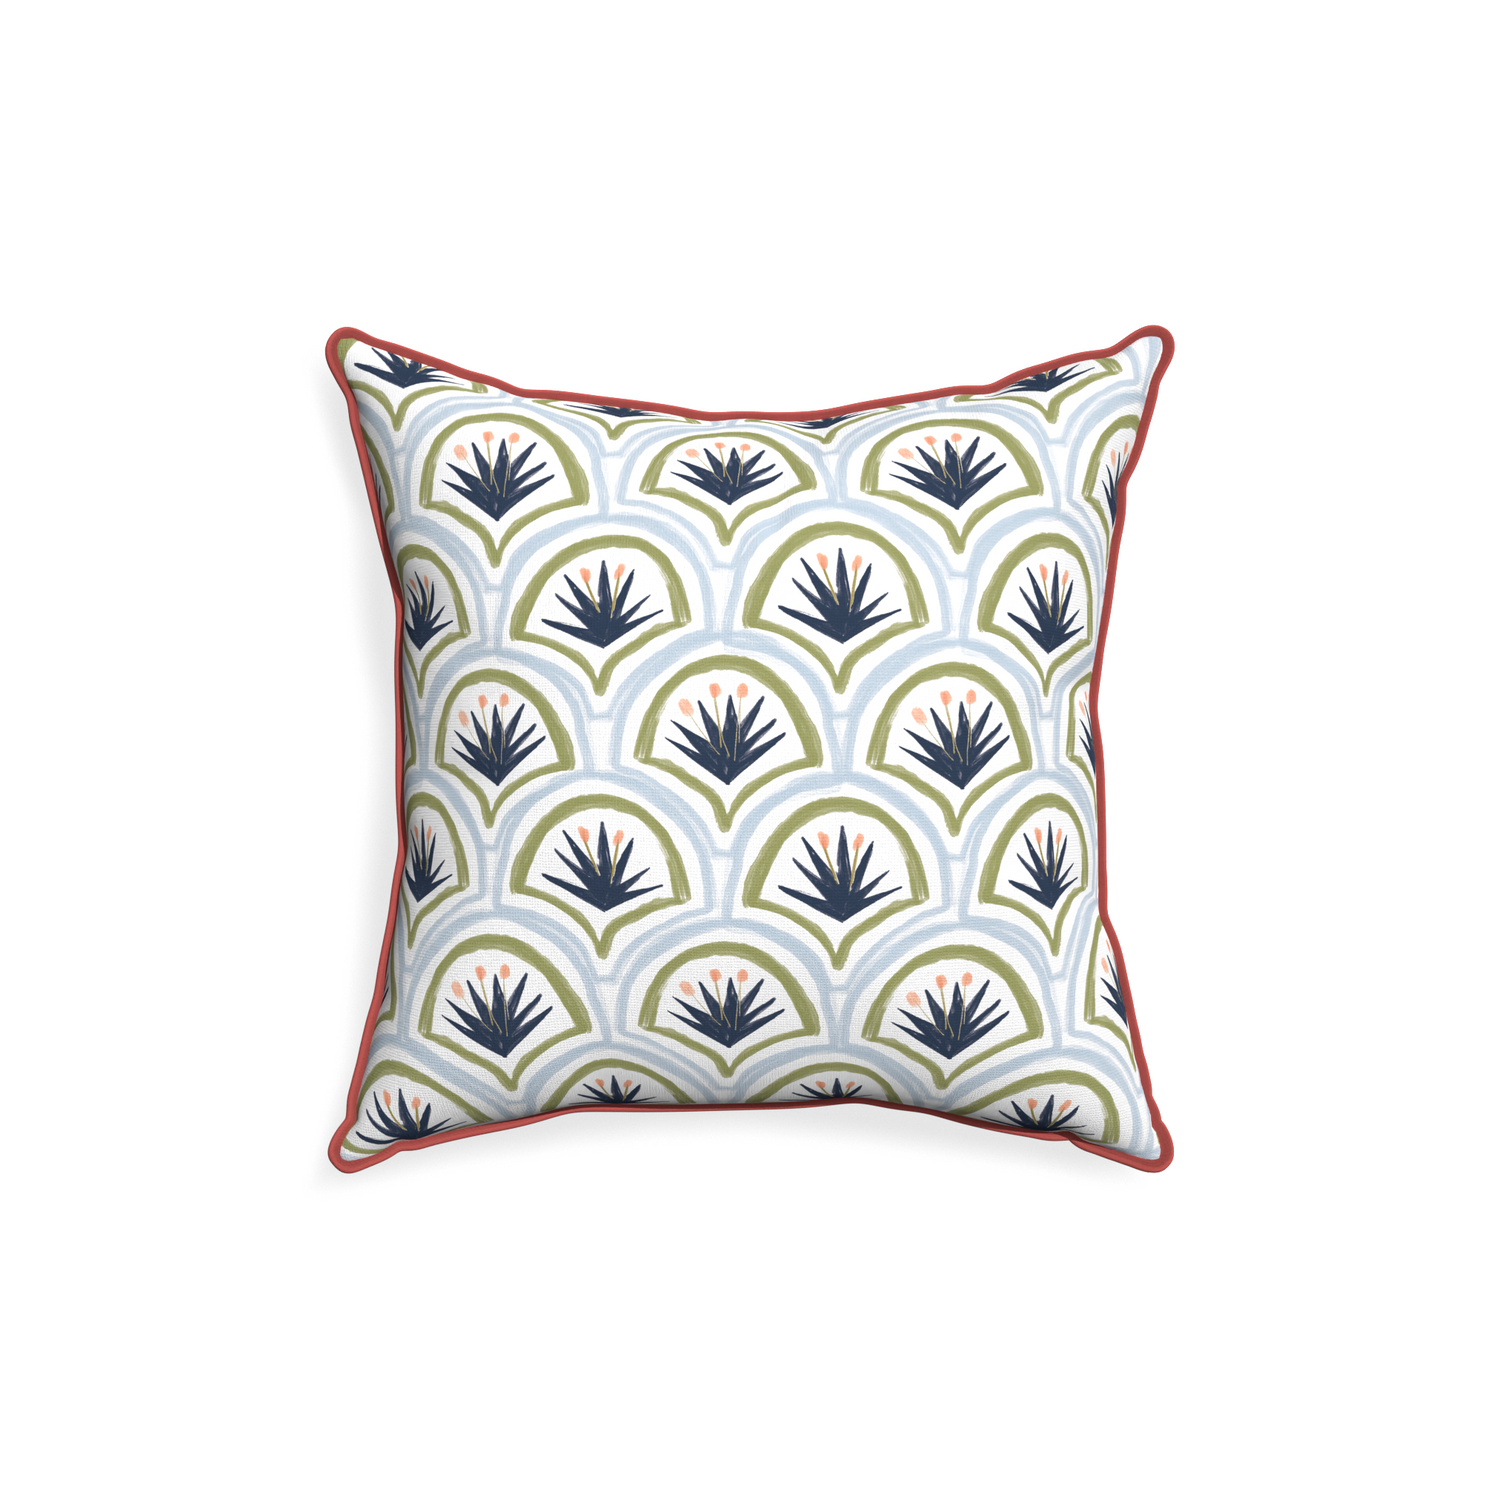 18-square thatcher midnight custom art deco palm patternpillow with c piping on white background